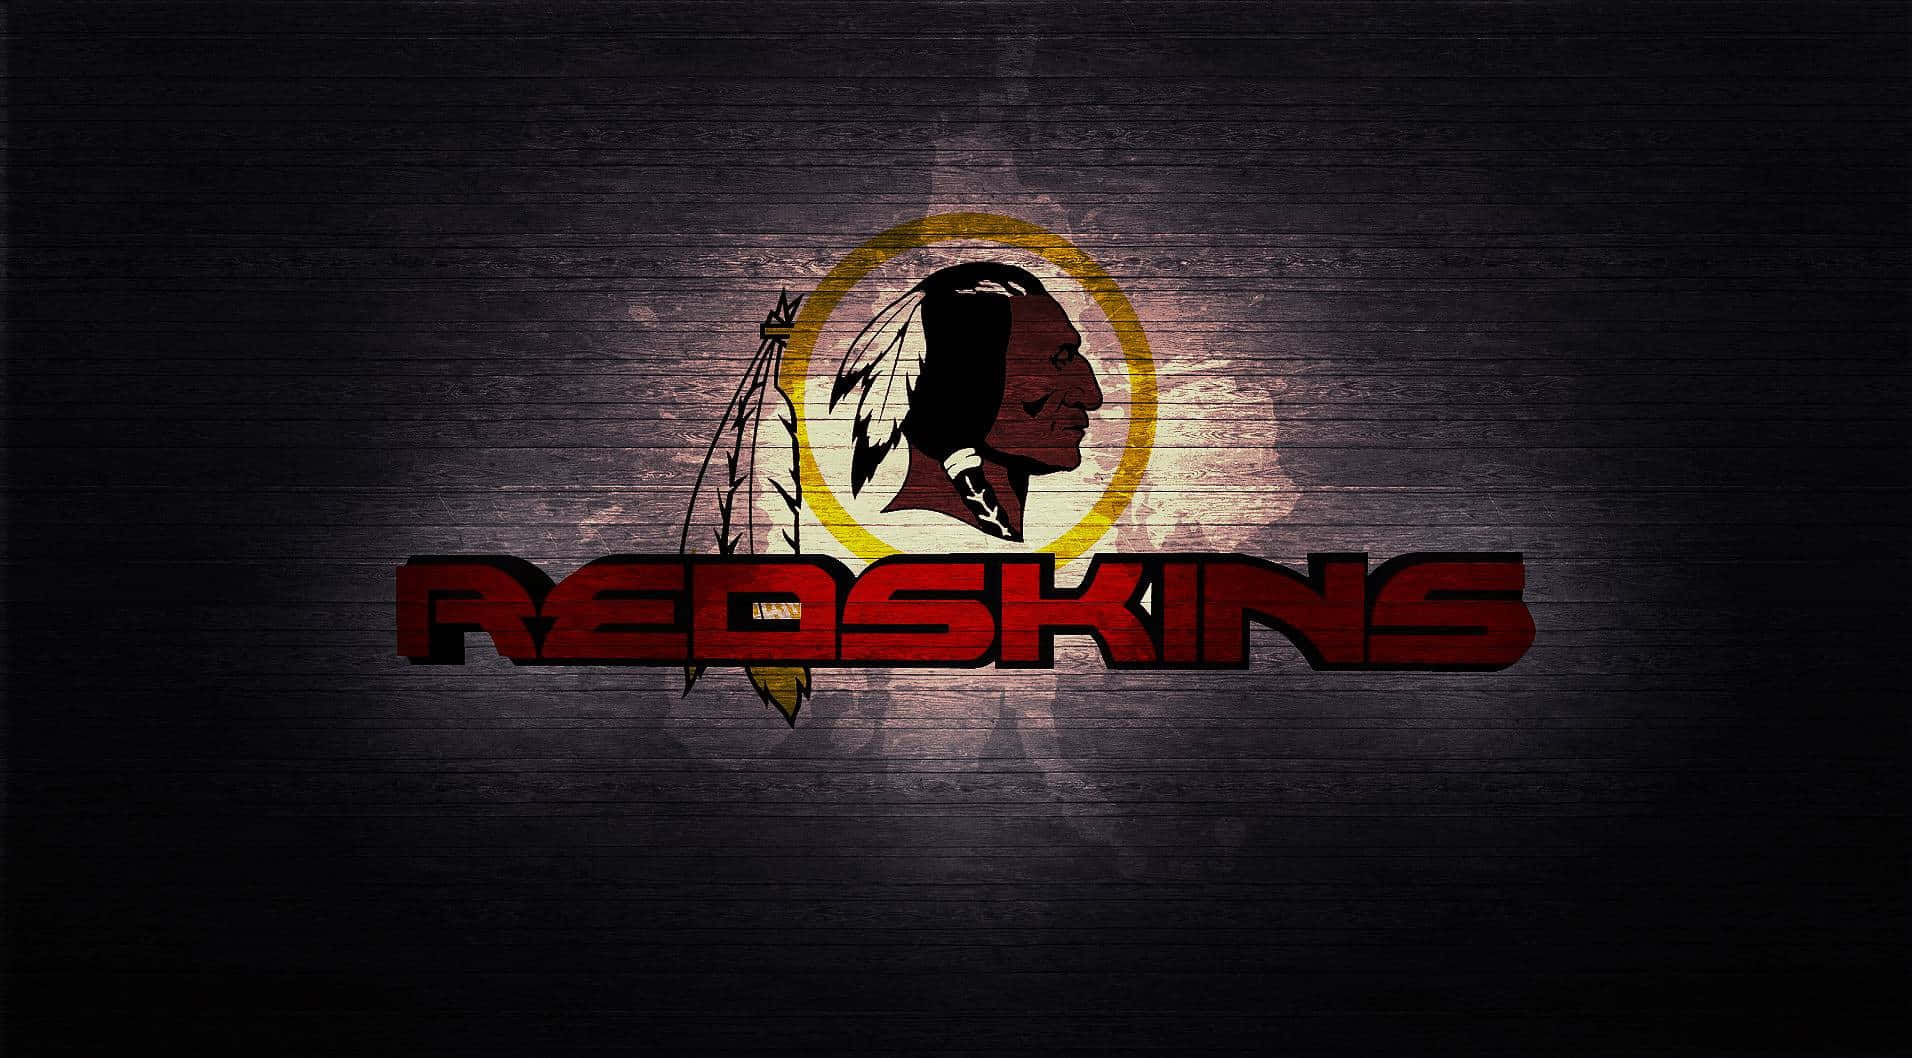 "The Washington Redskins proudly representing their division on the field" Wallpaper